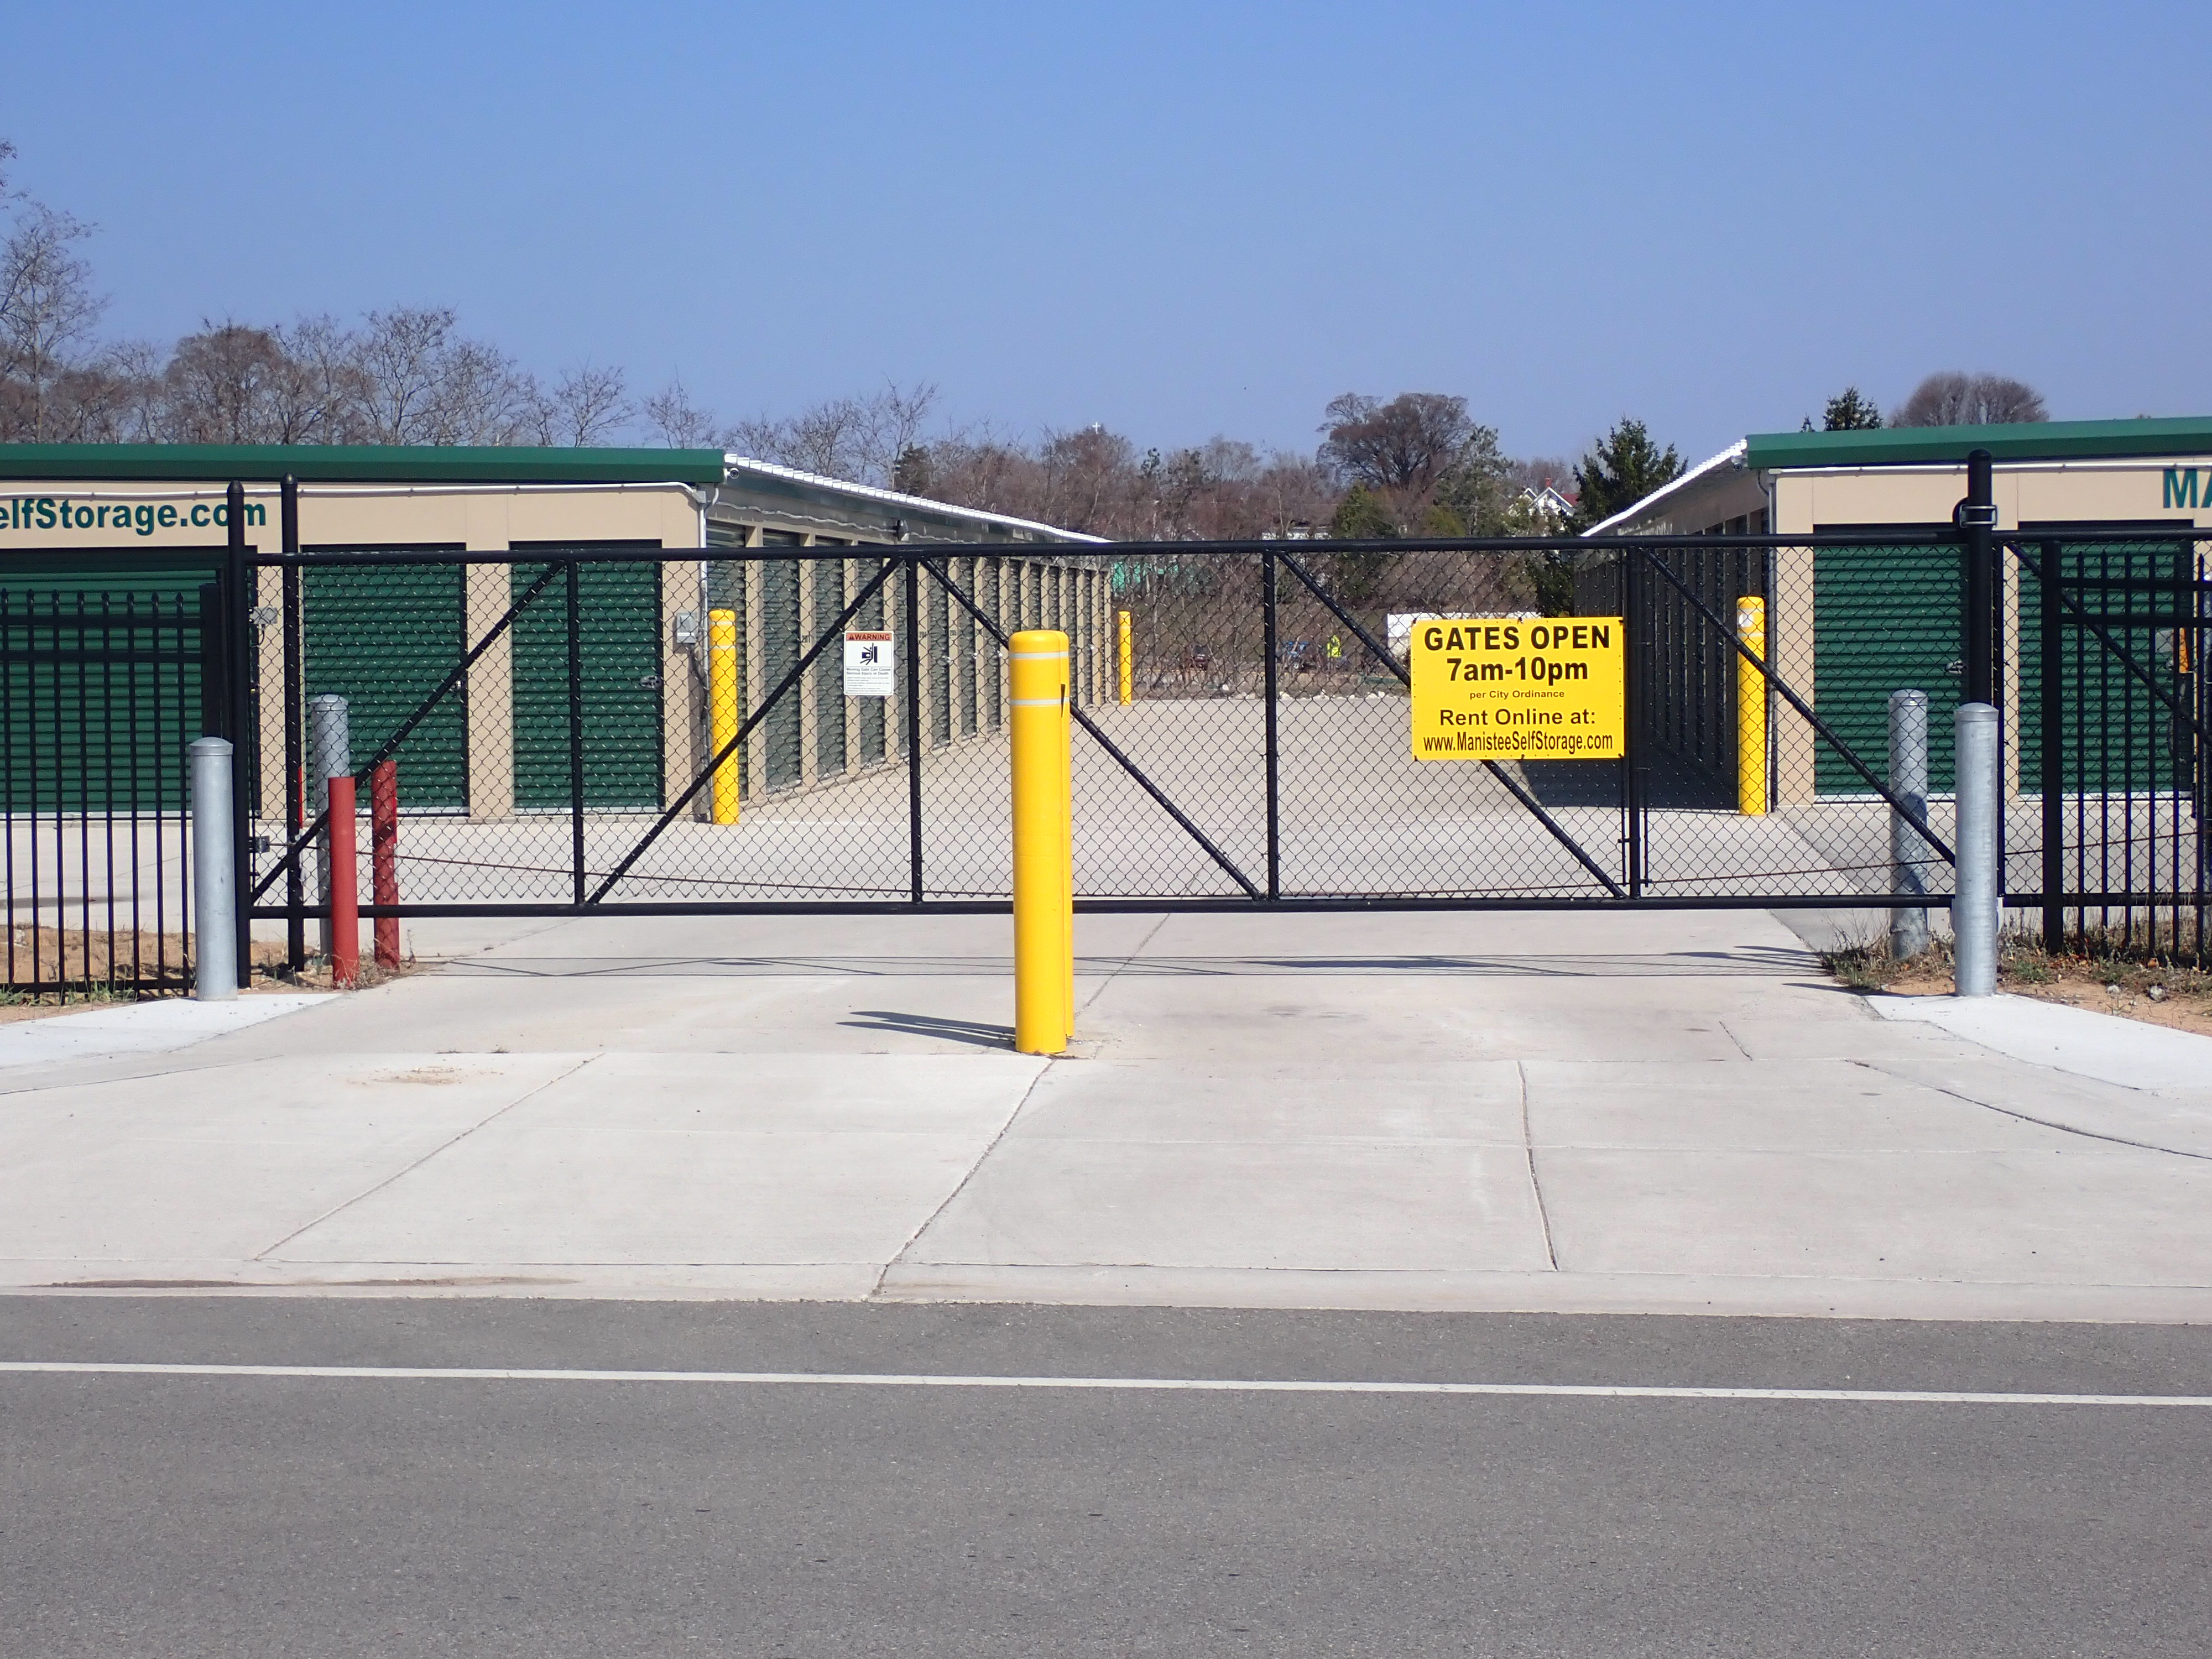 Fenced and gated storage facility in Manistee, MI